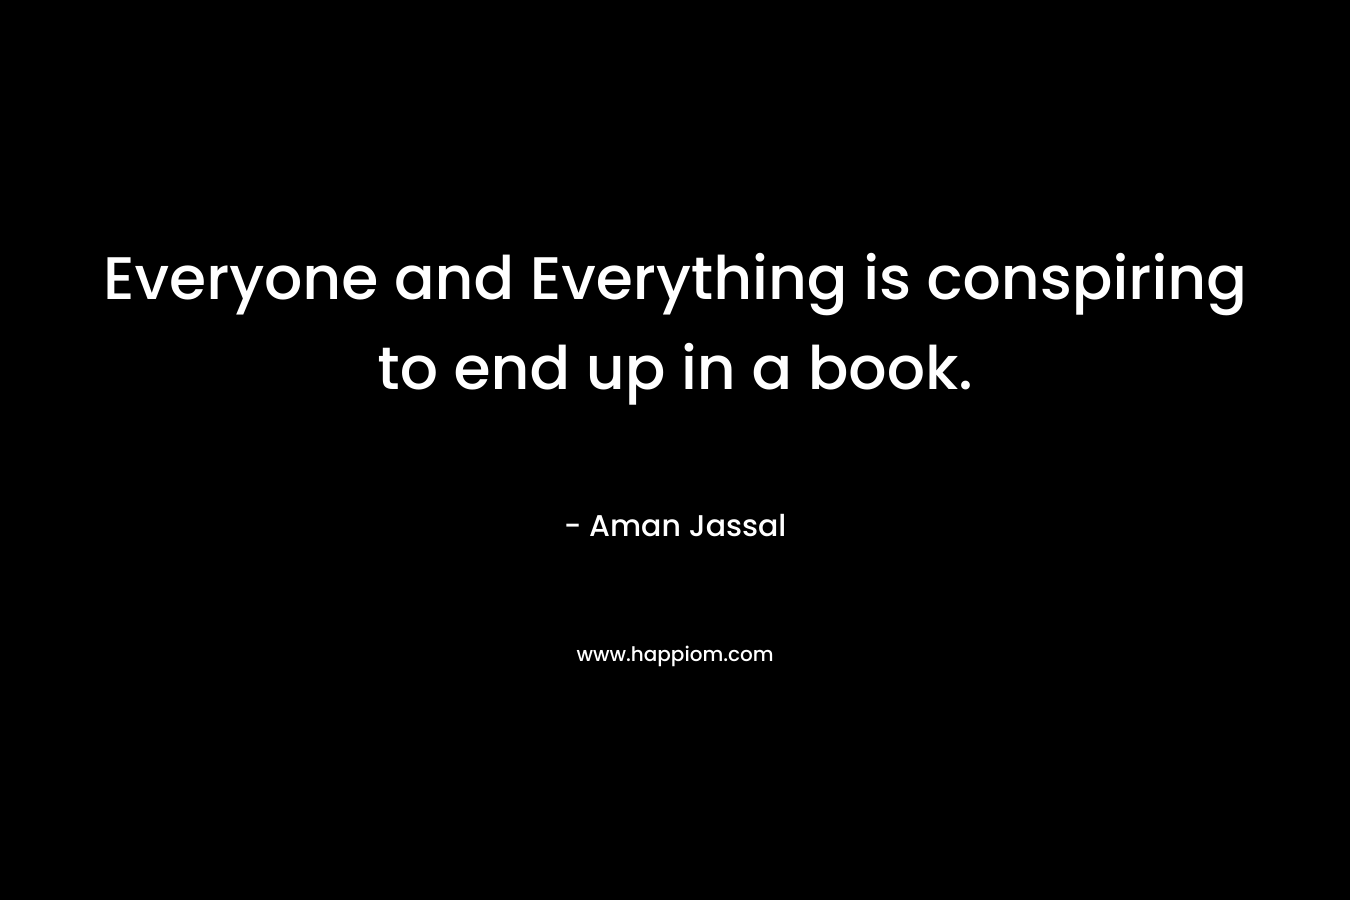 Everyone and Everything is conspiring to end up in a book. – Aman Jassal